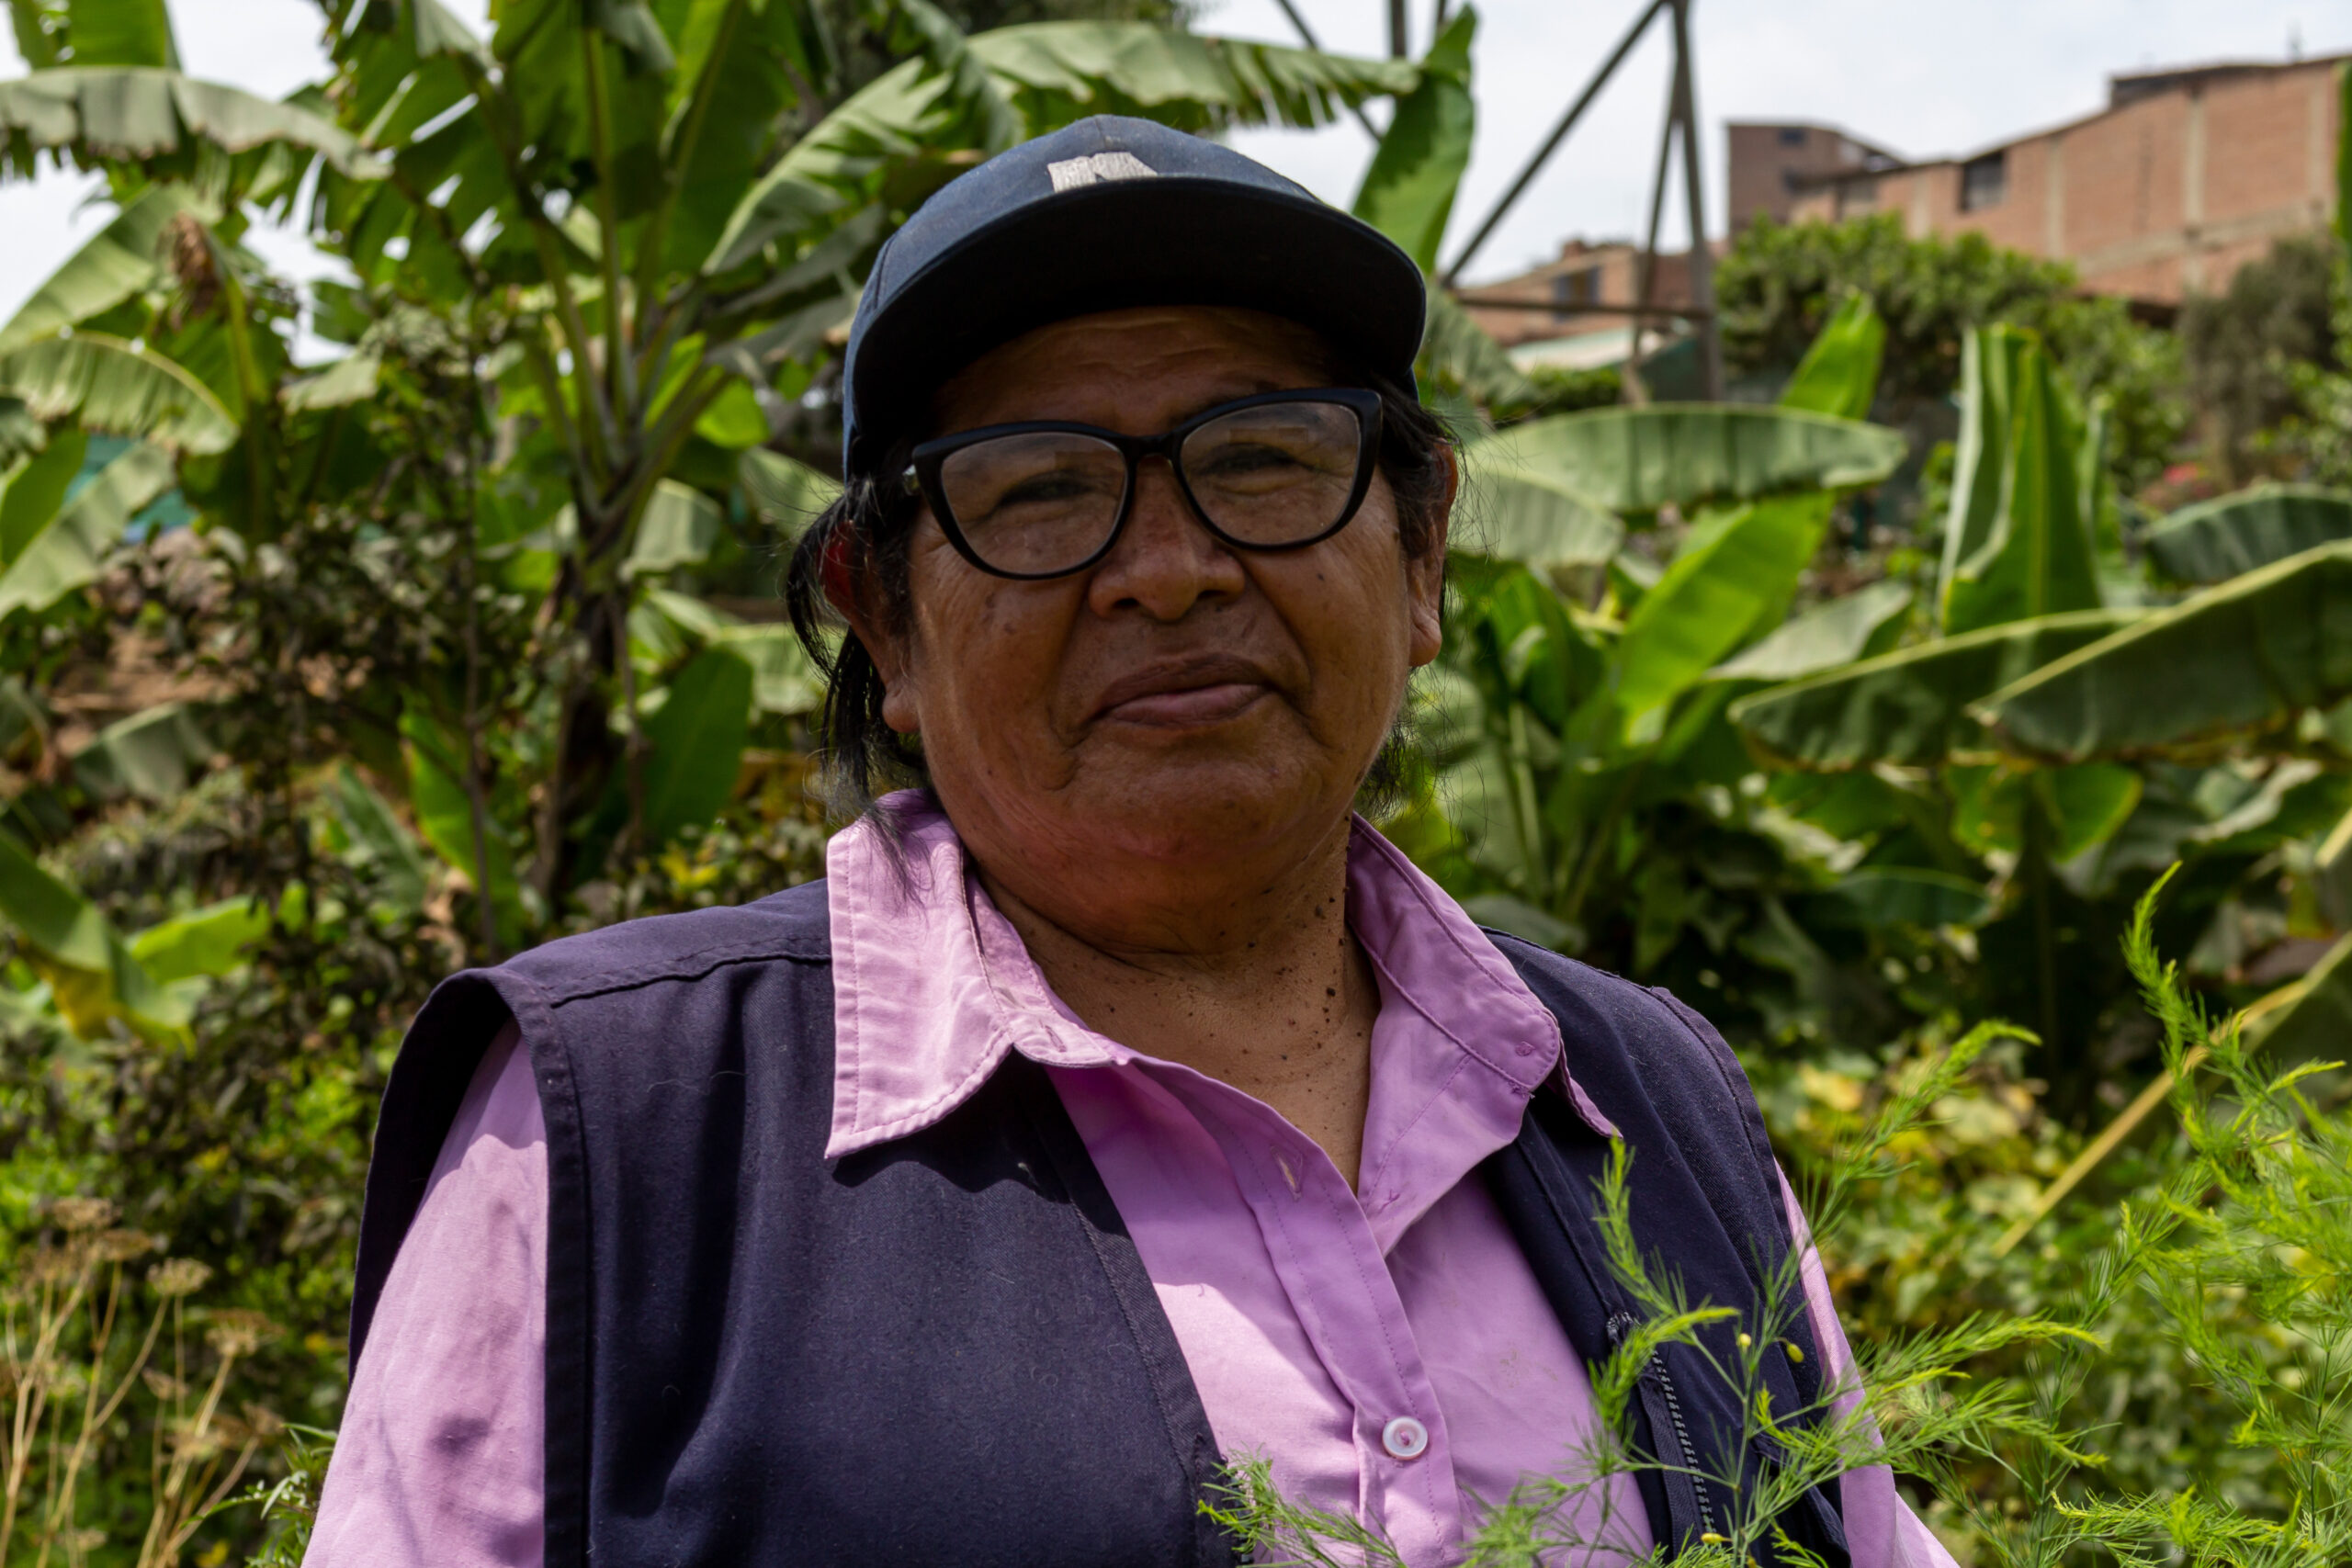 Urban agriculture in Peru is creating communities committed to healthy living and a cleaner environment